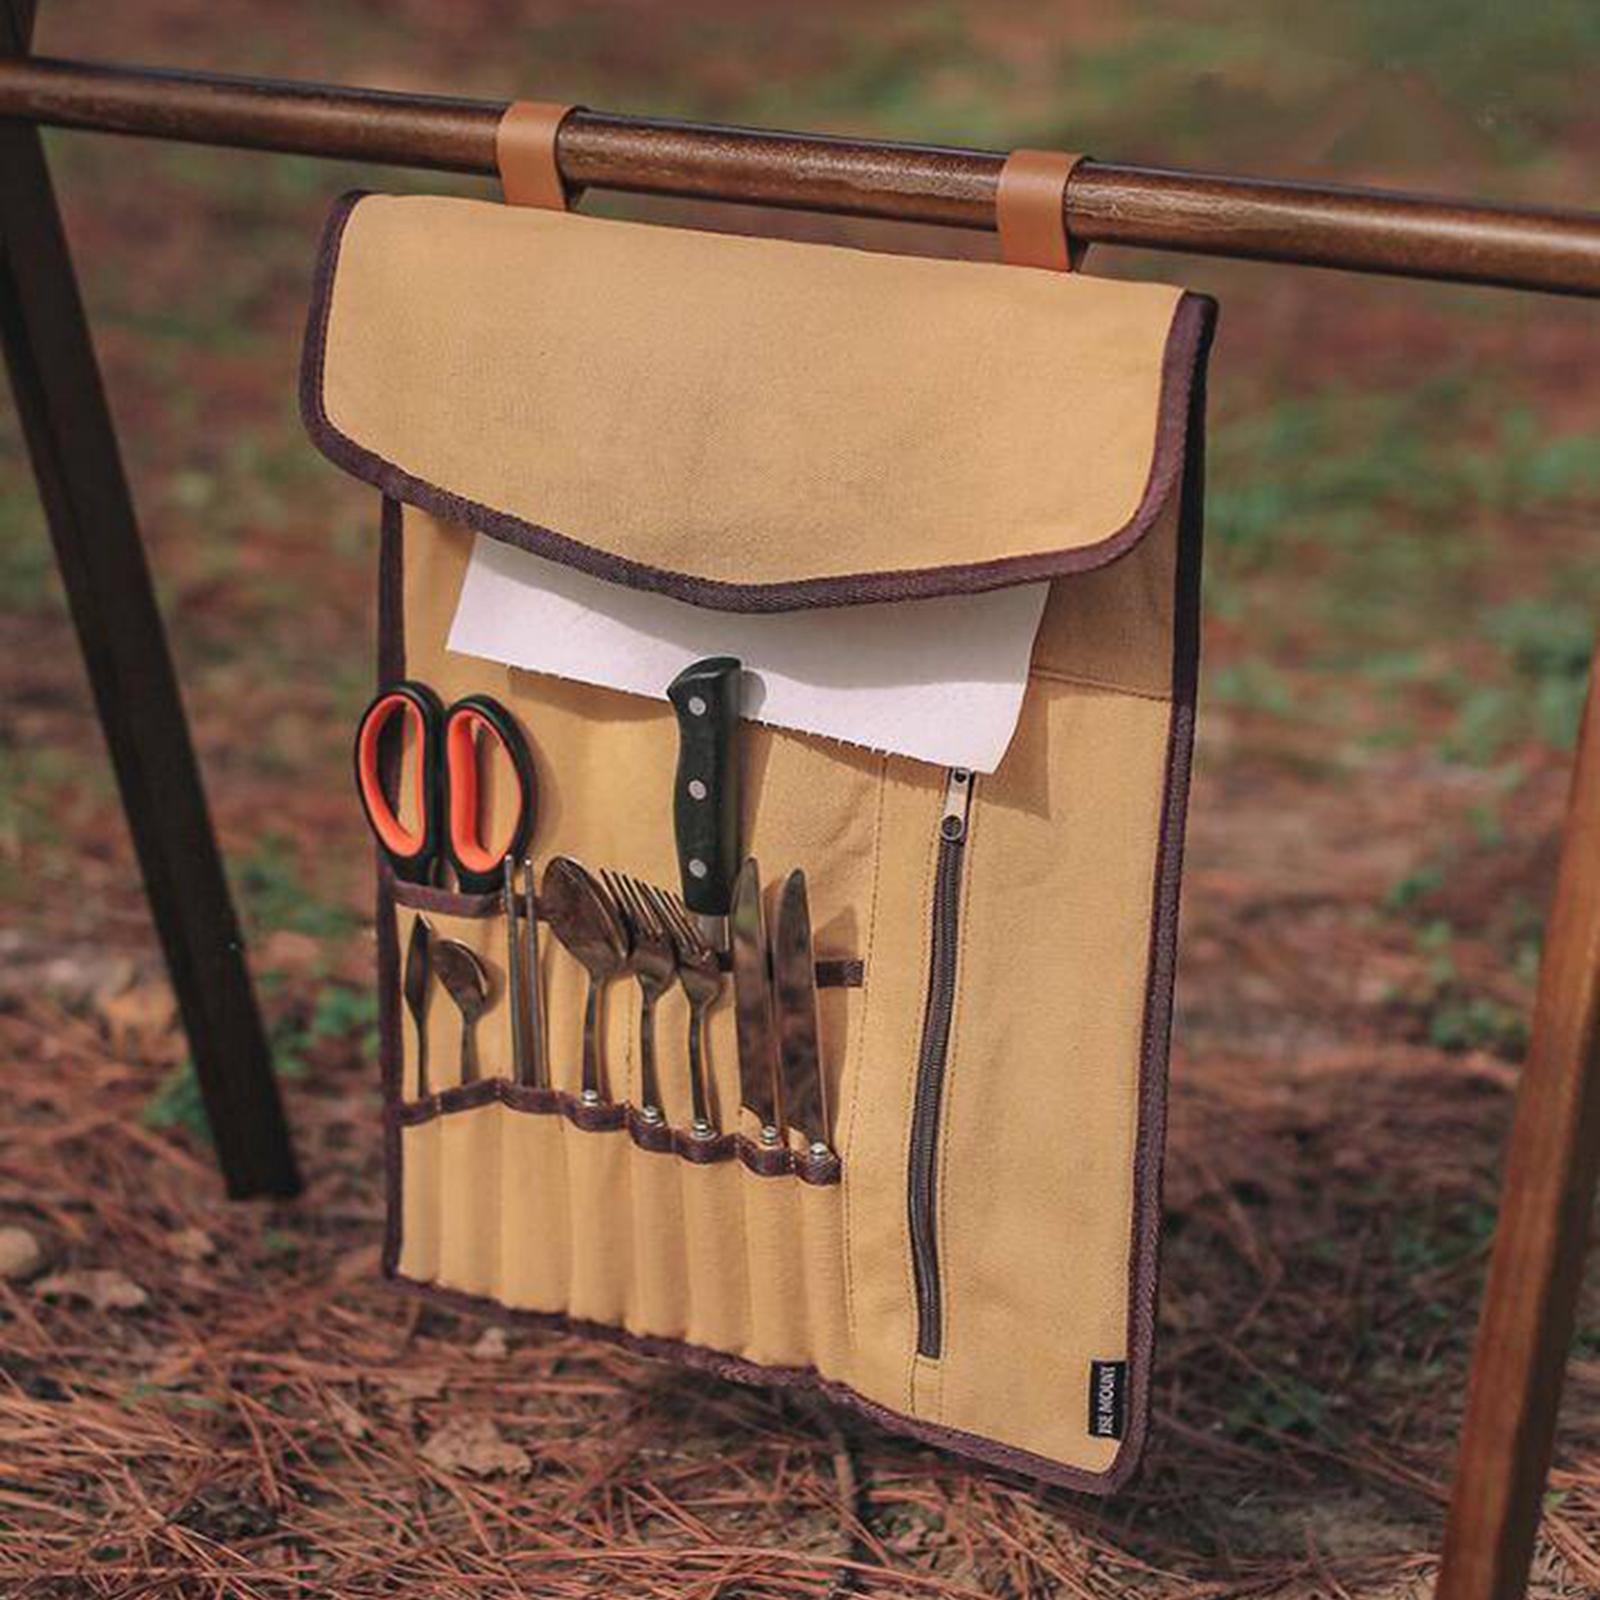 Camping Utensil Roll up Bag Tableware Organizer Roll Holder Storage Culinary